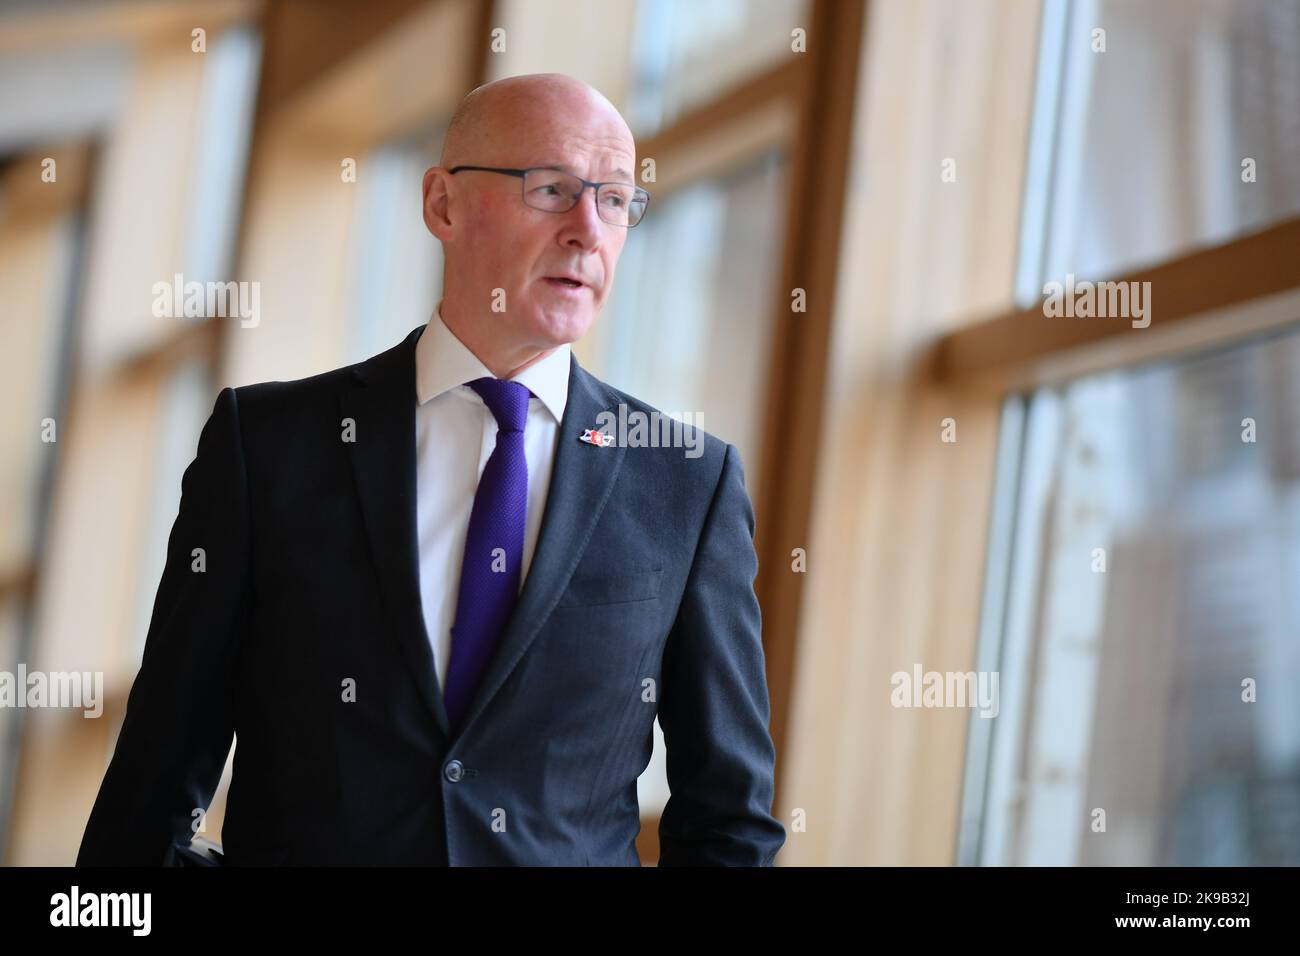 Edinburgh Scotland, UK 27 October 2022. John Swinney arrives for First Ministers Questions at the Scottish Parliament. credit sst/alamy live news Stock Photo